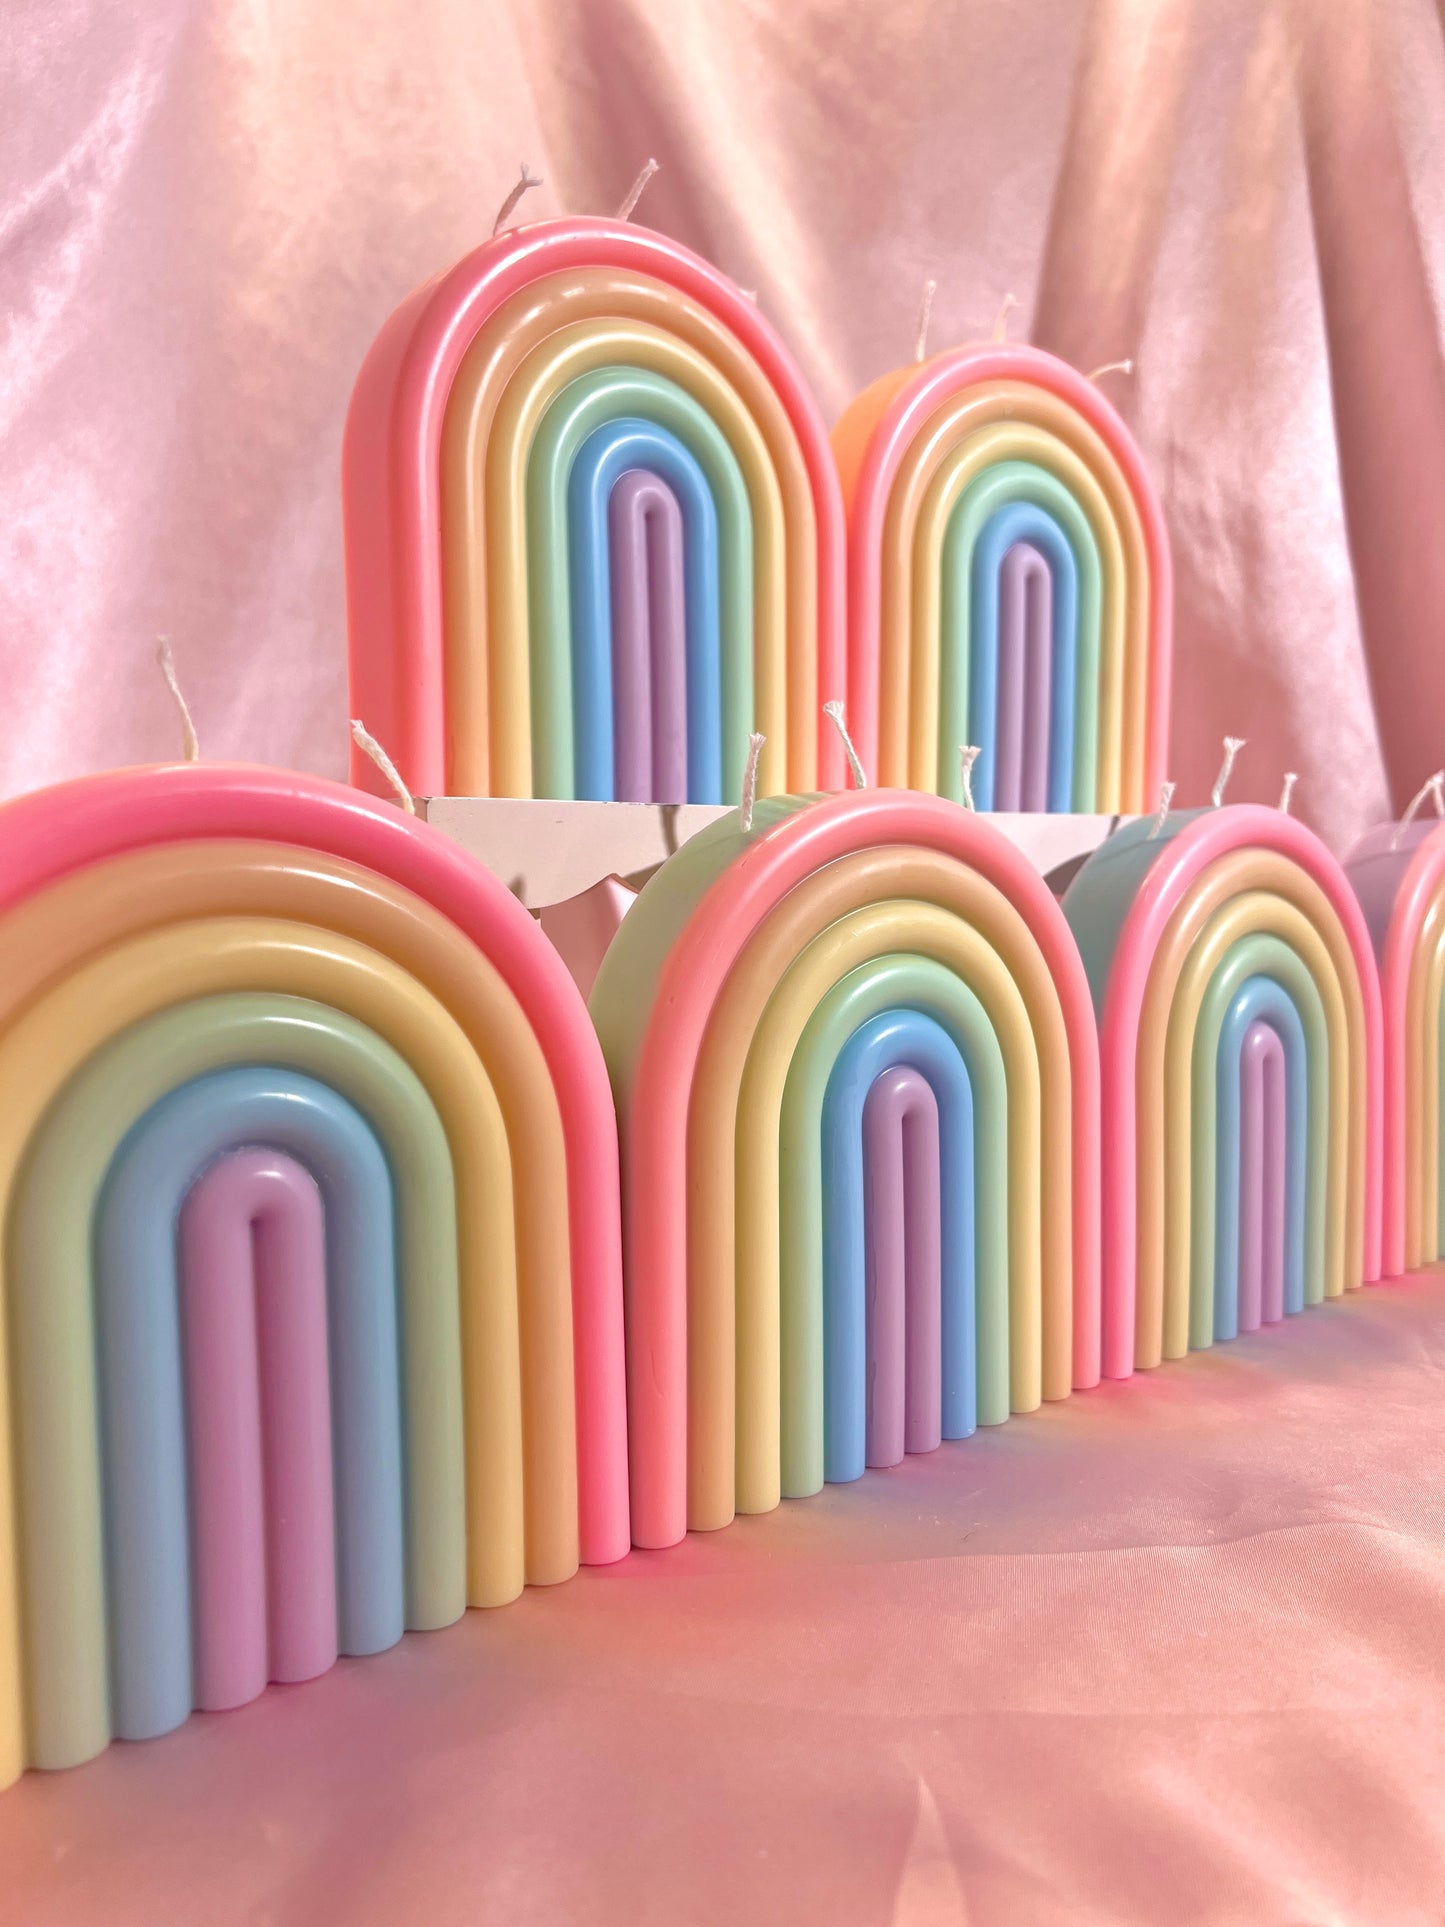 Over the Rainbow - Large & Slender Rainbow Arch Shaped Aesthetic Candle